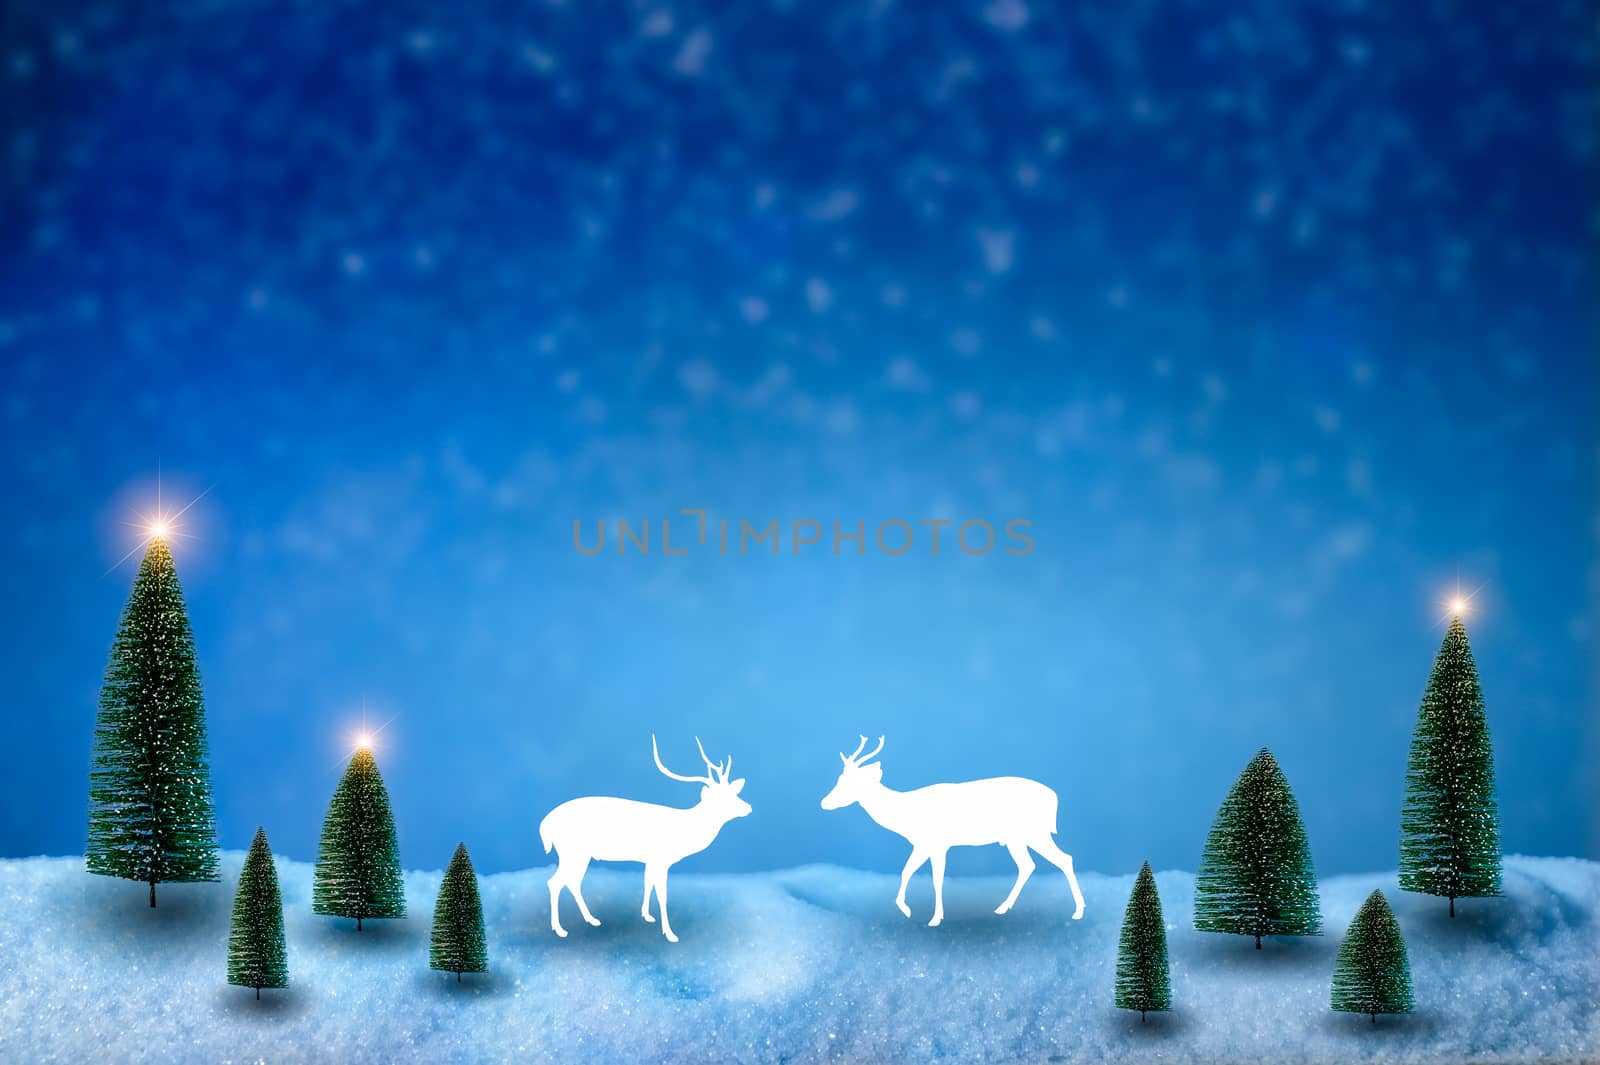 Merry christmas and happy new year greeting background. Christmas Lantern On Snow With Fir by sarayut_thaneerat